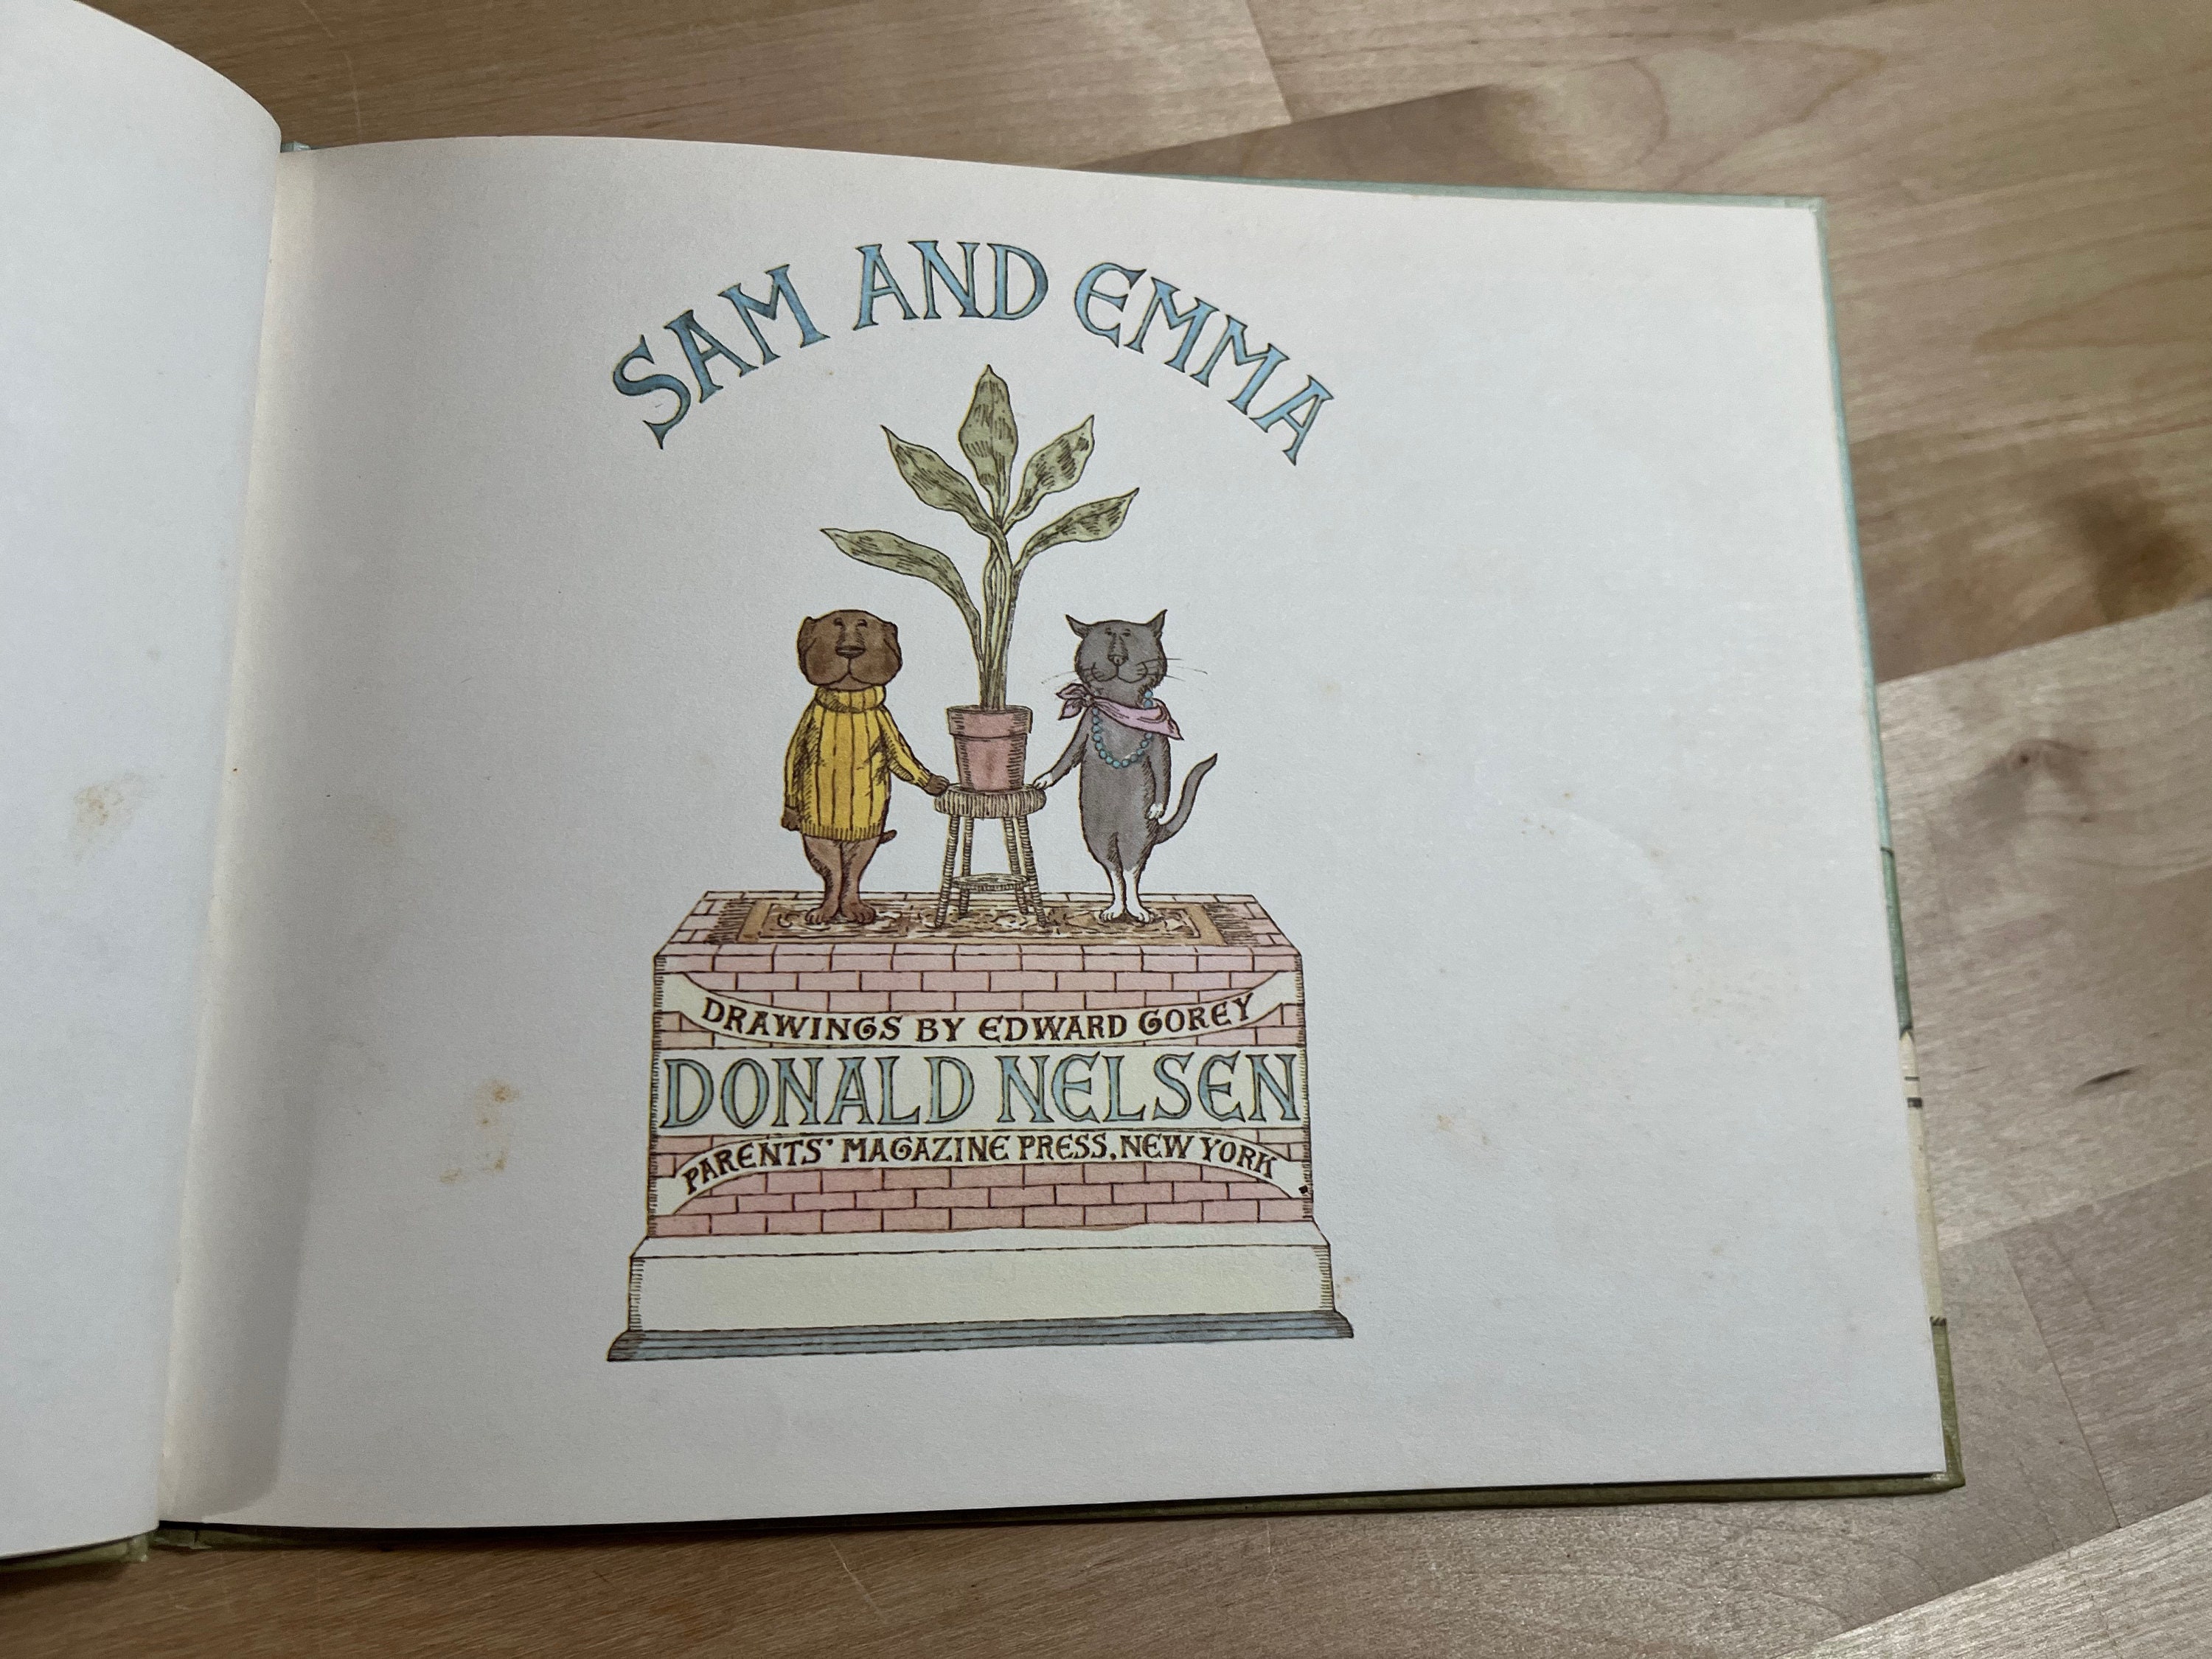 Sam and Emma by Donald Nelson Illustrated by Edward Gorey 